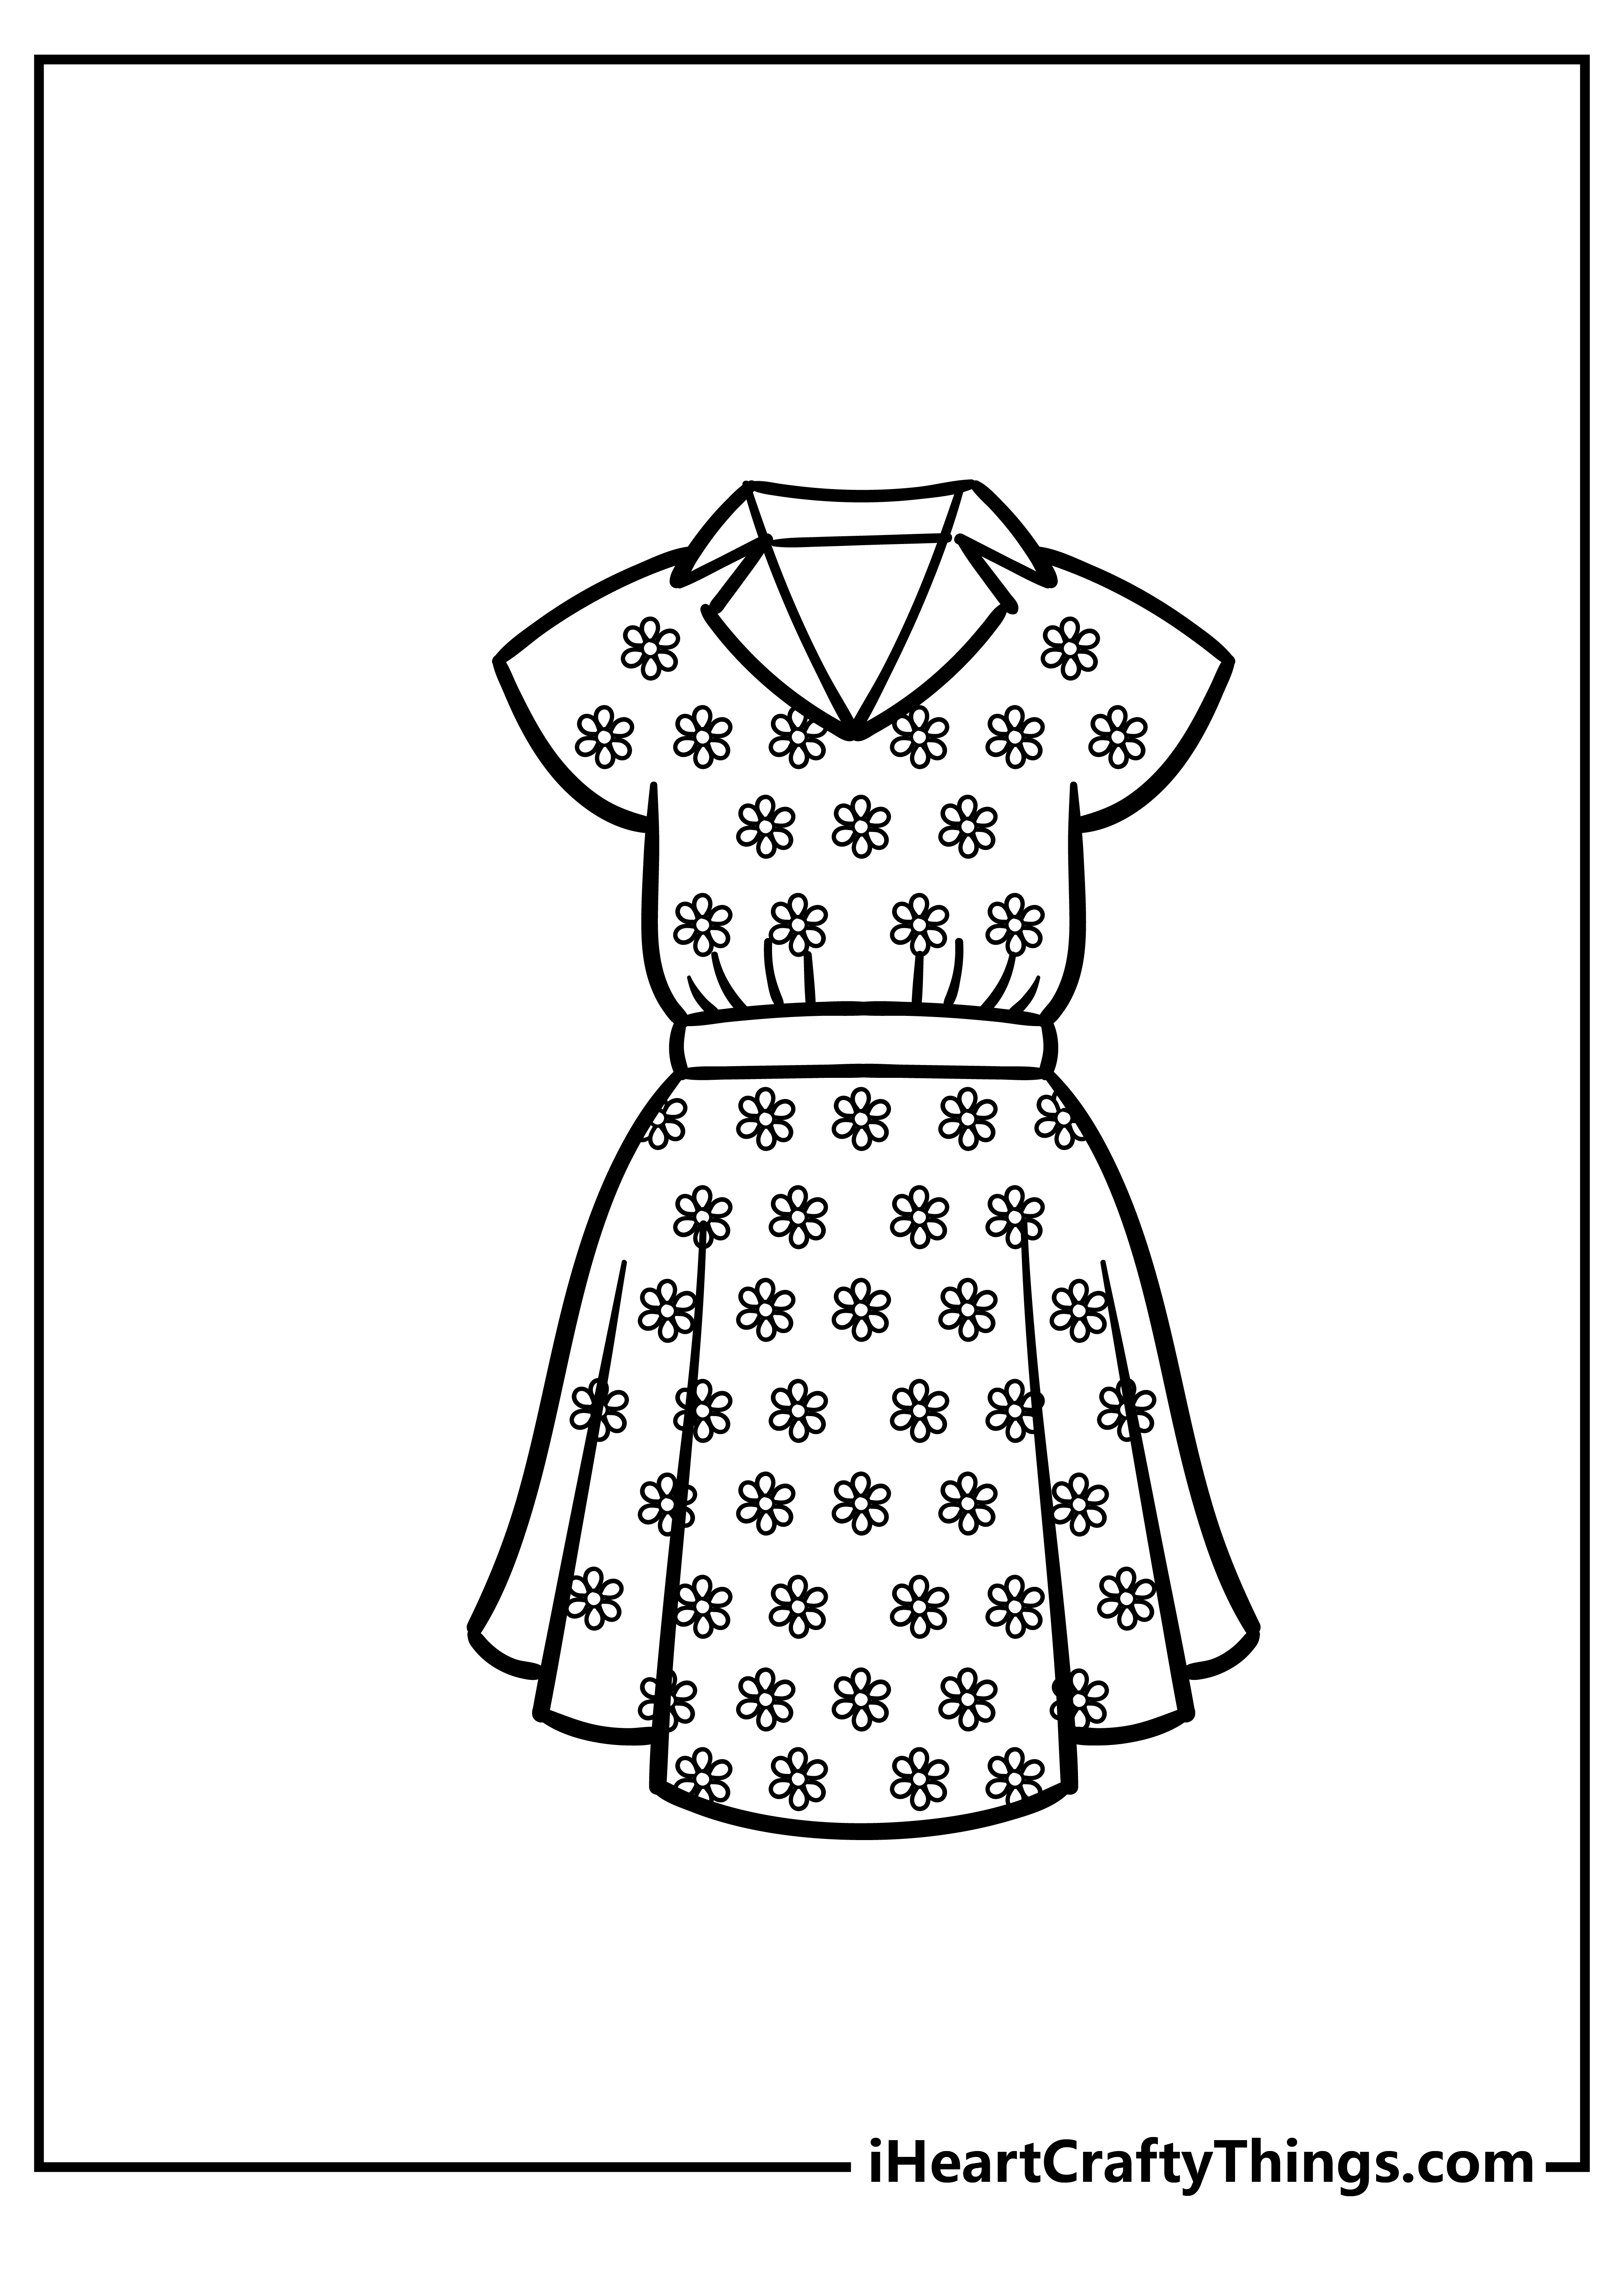 Dress Coloring Pages for preschoolers free printable